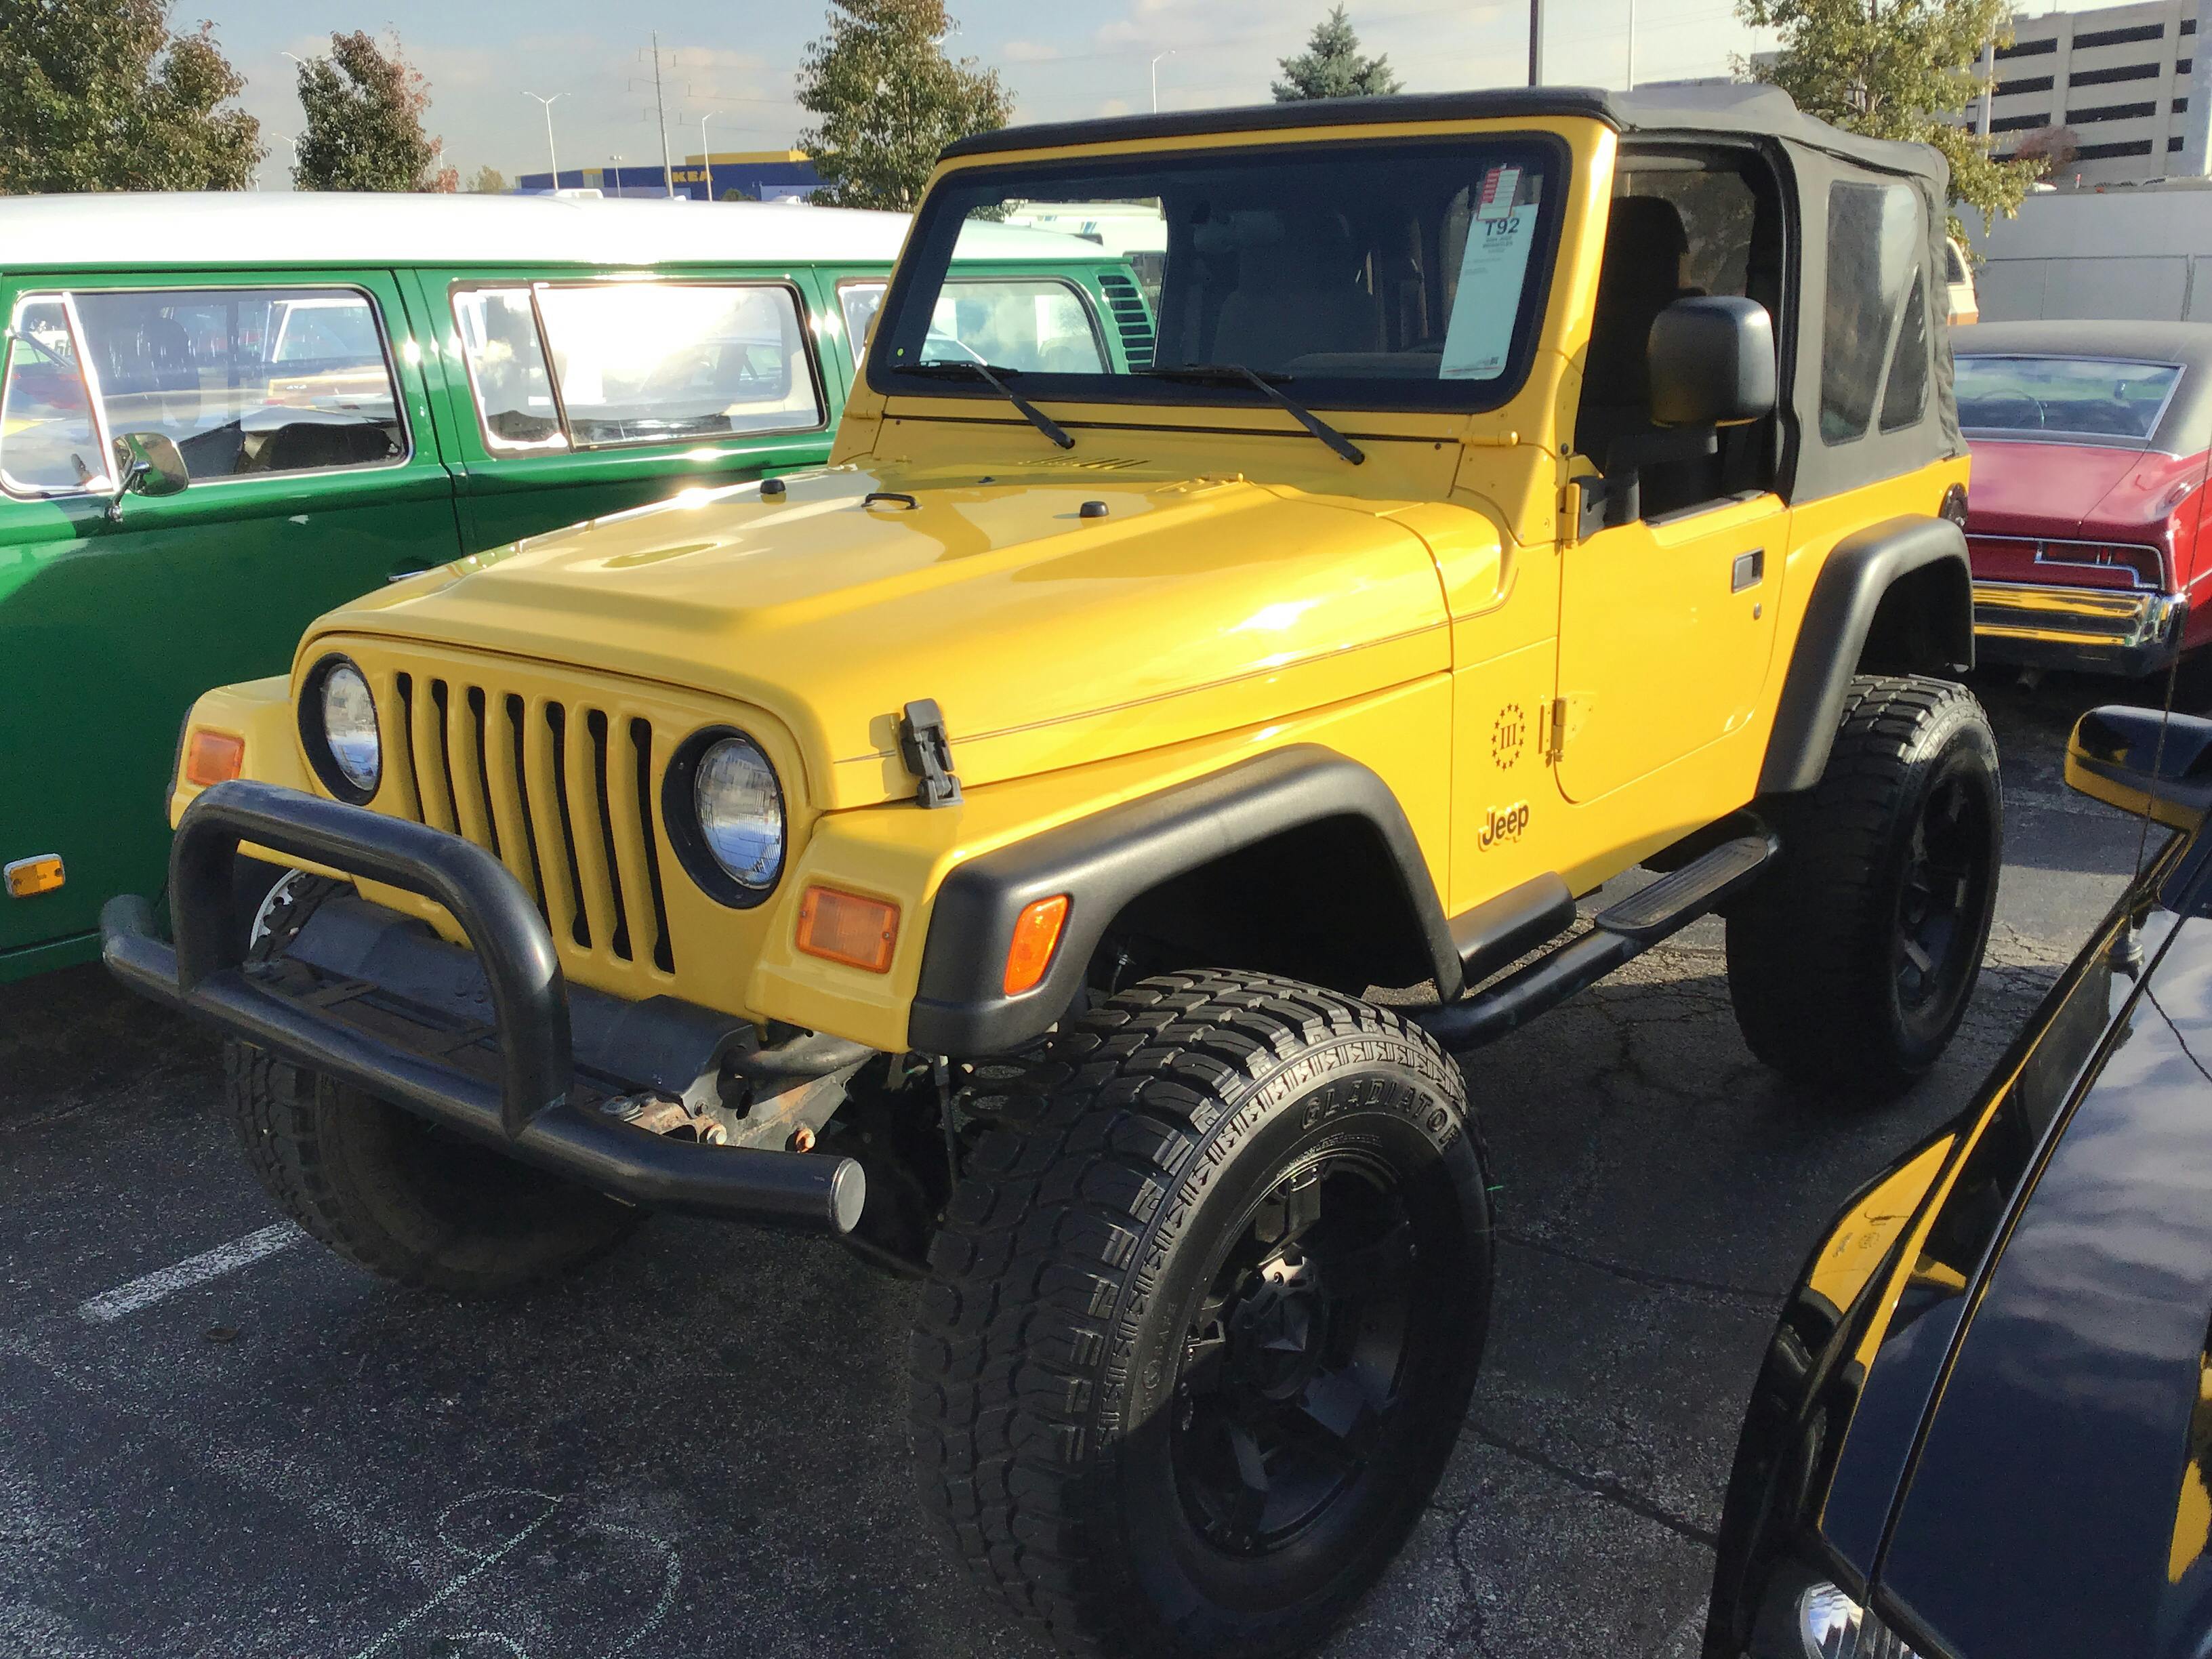 2005 Jeep Wrangler SE | Hagerty Valuation Tools